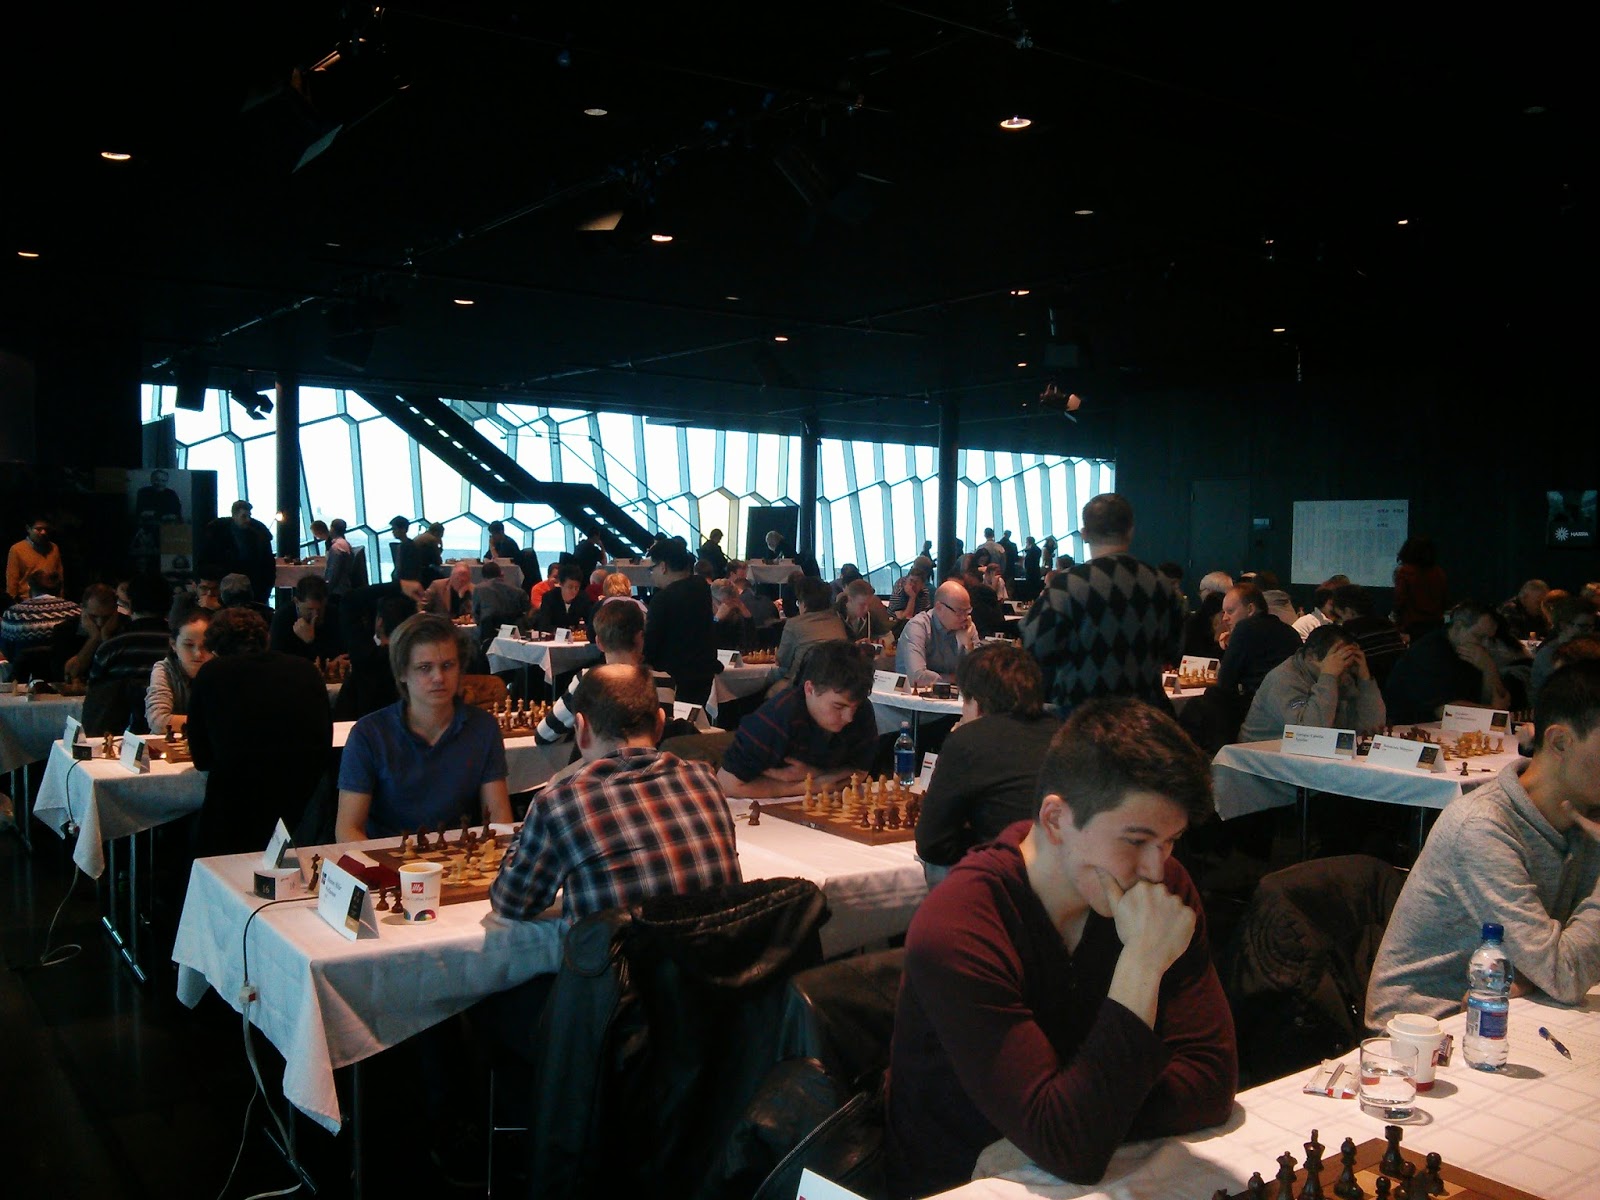 Impressions from the Reykjavik Open